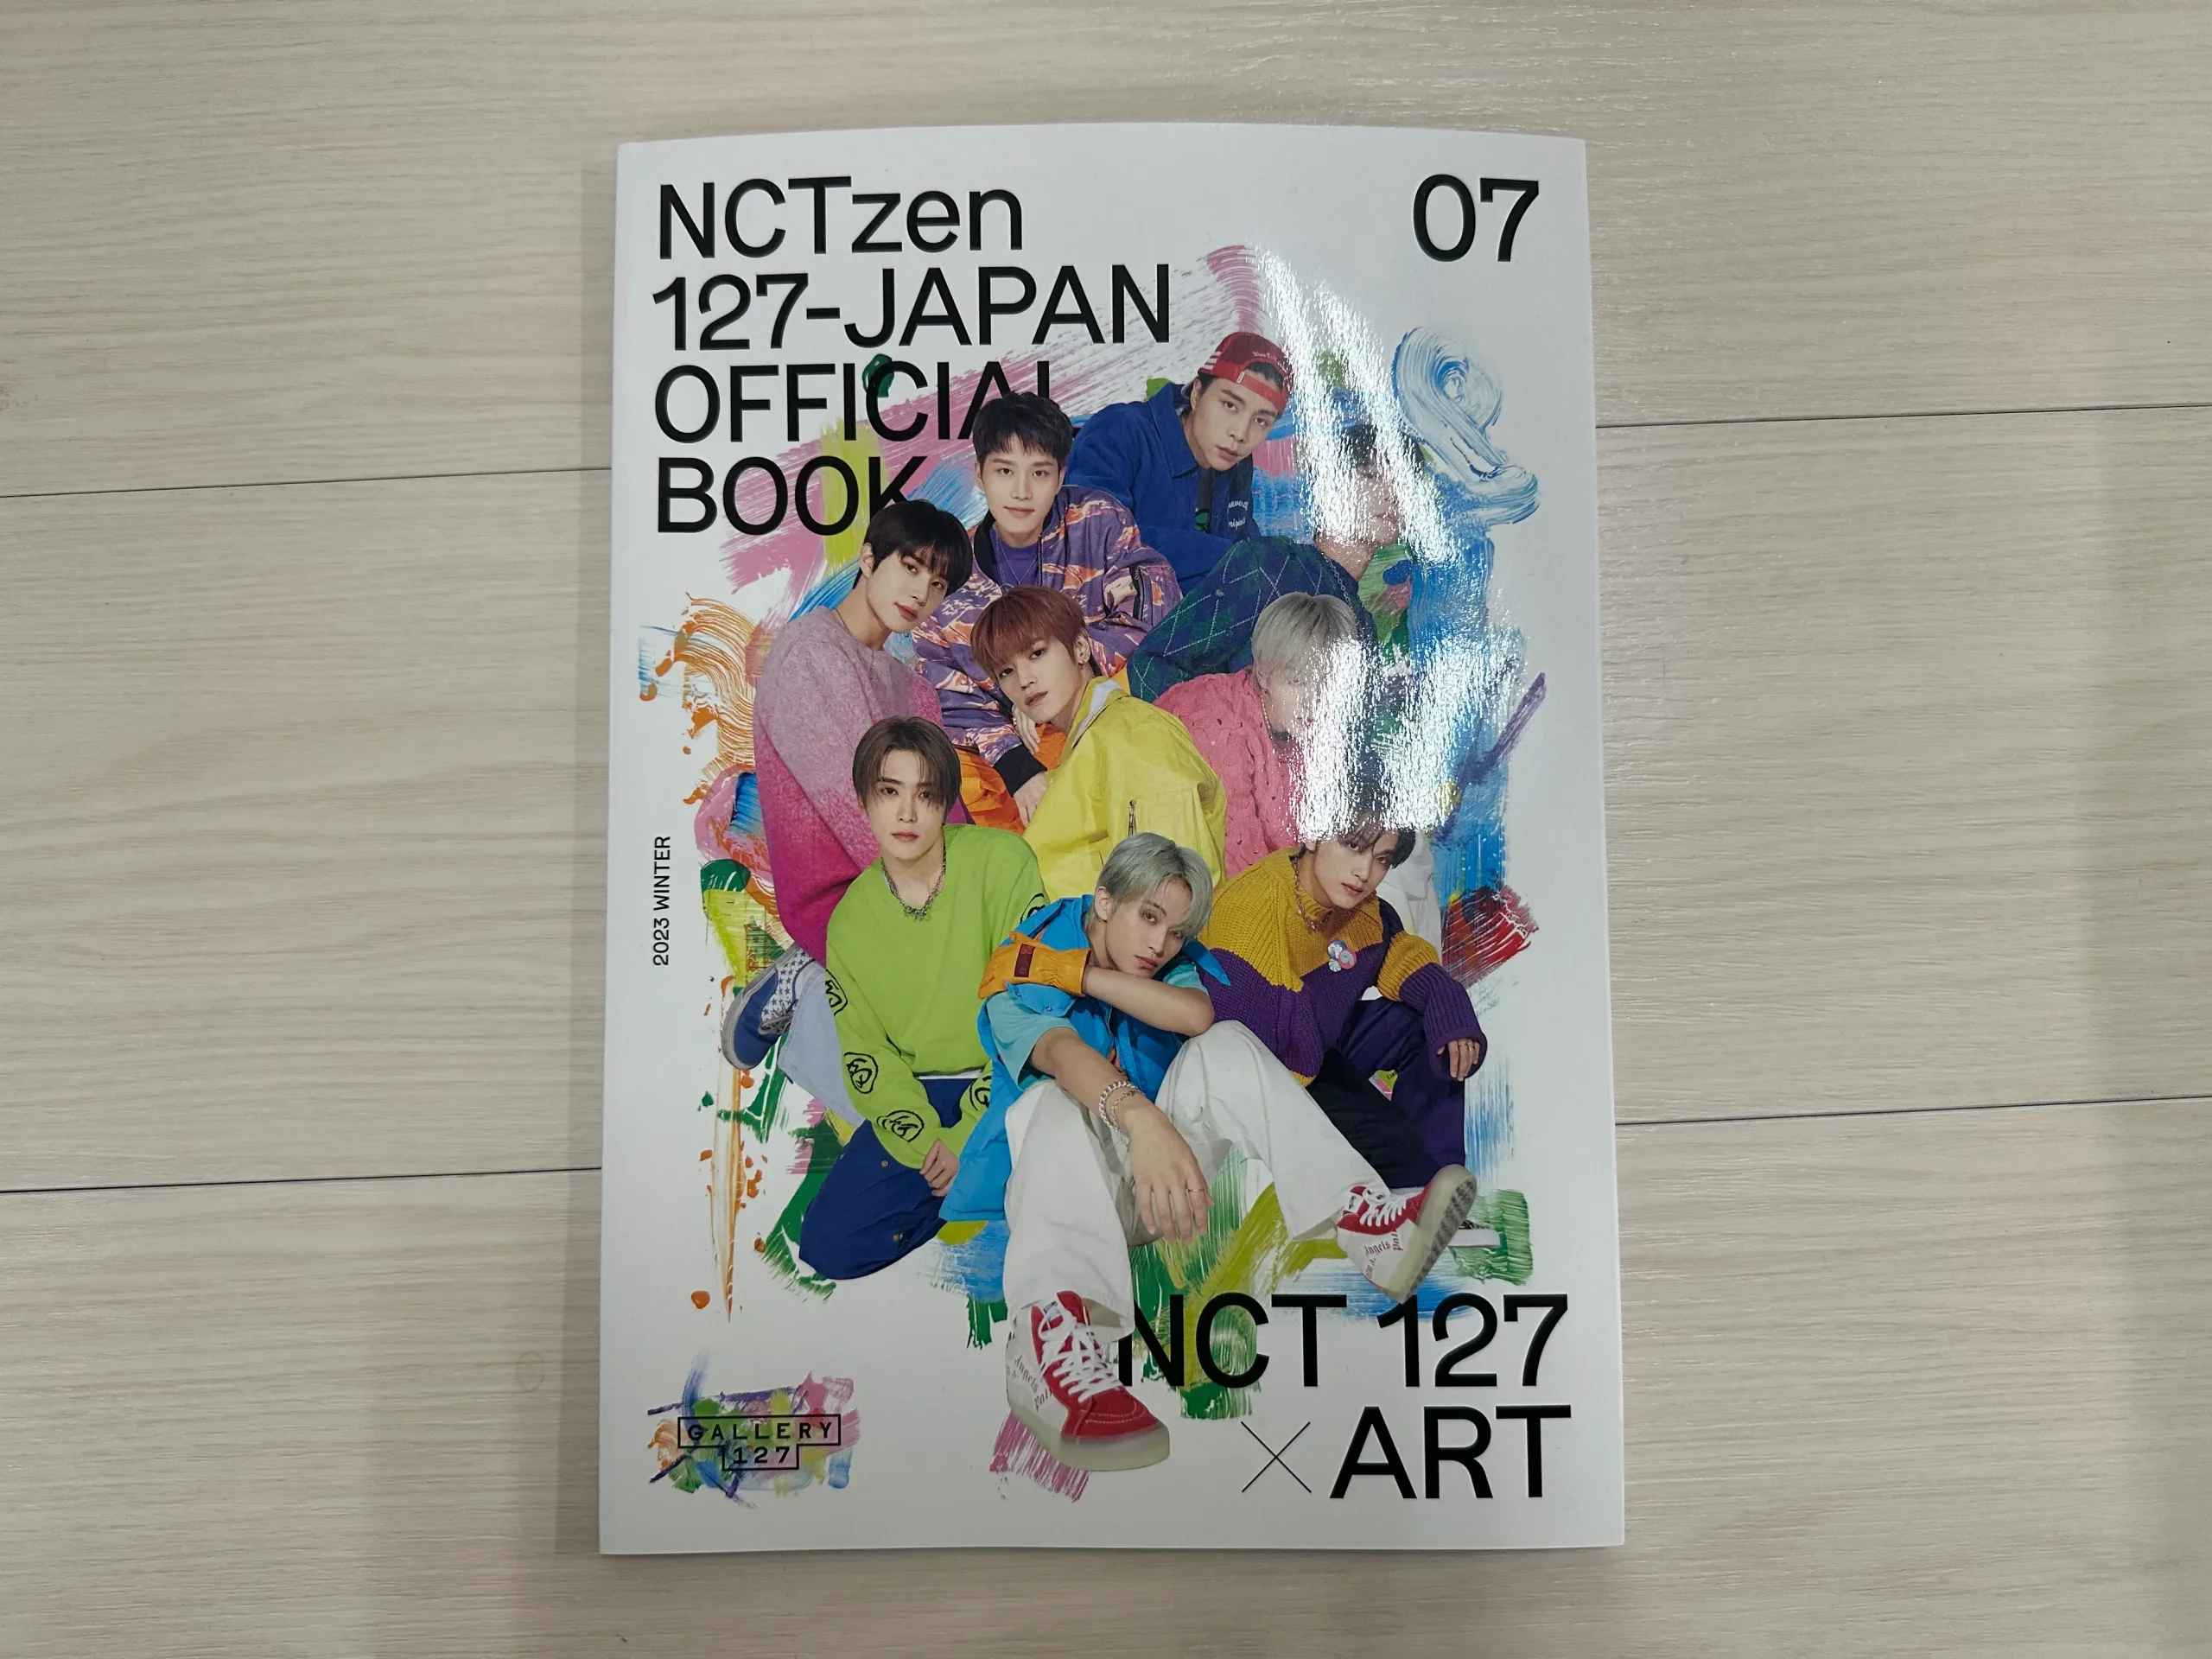 NCT127 JAPAN OFFICIAL BOOK 07